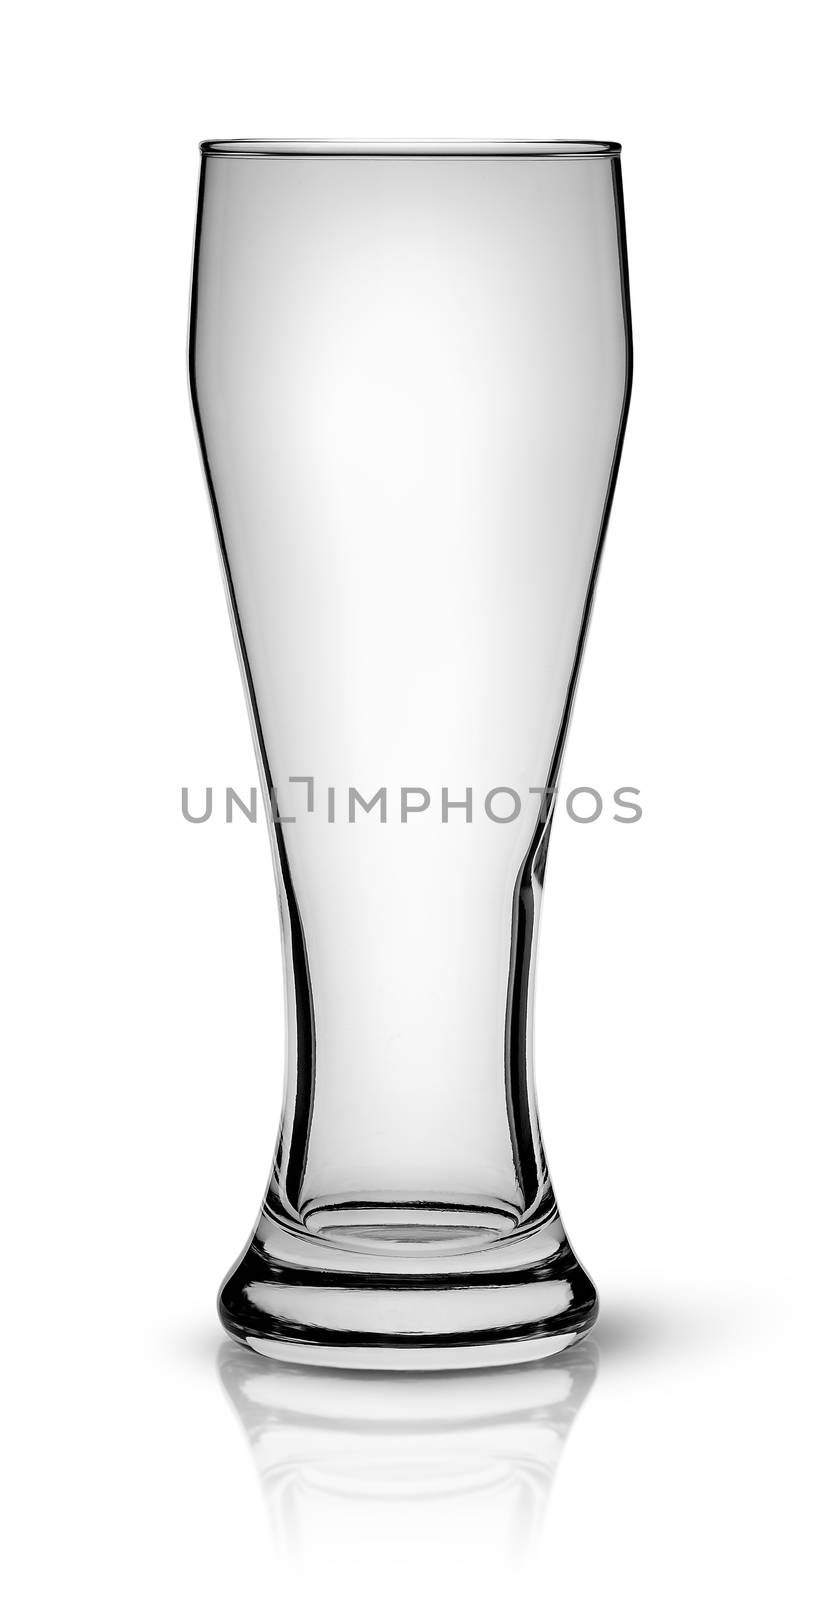 In front empty beer glass isolated on white background